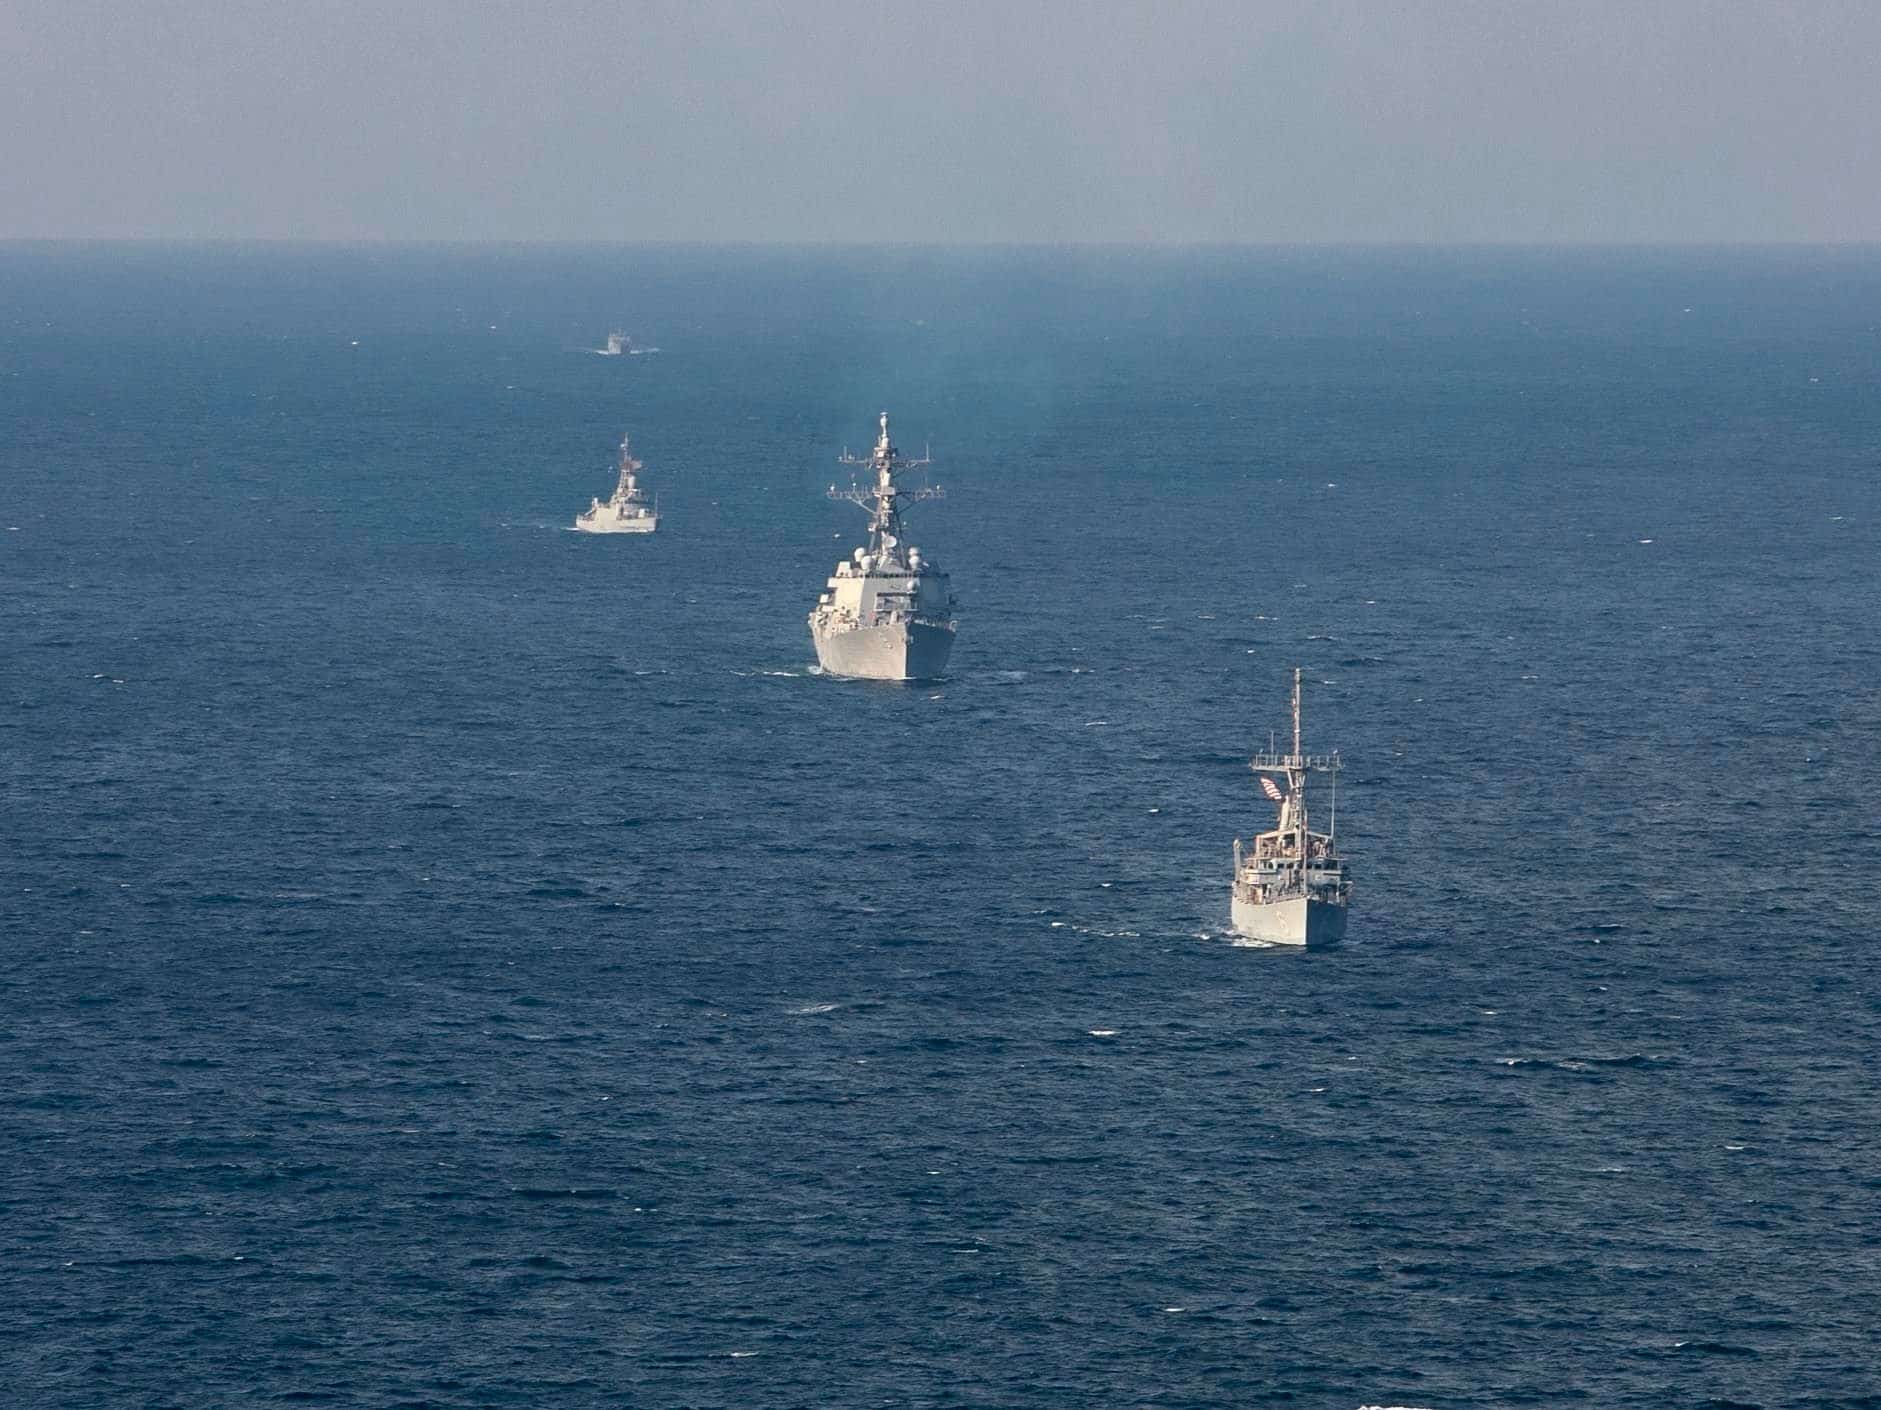 221104-N-UL352-1605 ARABIAN GULF (Nov. 4, 2022) Mine countermeasure ship USS Devastator (MCM 6), front, and guided-missile destroyer USS Delbert D. Black (DDG 119) sail in formation with Royal Saudi Naval Forces ships during exercise Nautical Defender in the Arabian Gulf